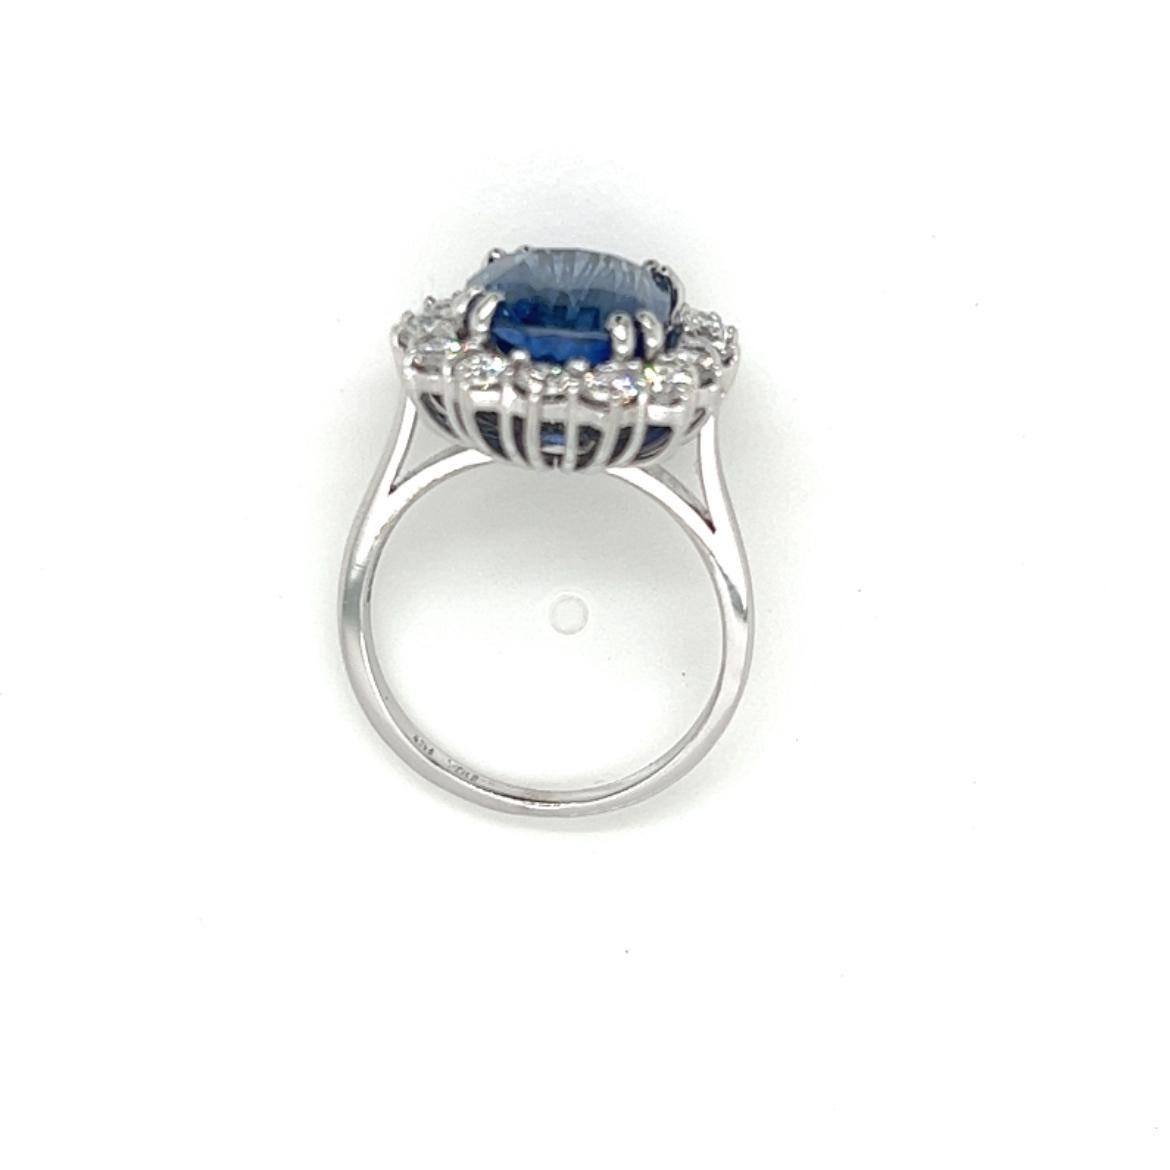 GCS Certified 8.57 Carat Ceylon Sapphire and Diamond Ring in 18K White Gold For Sale 1